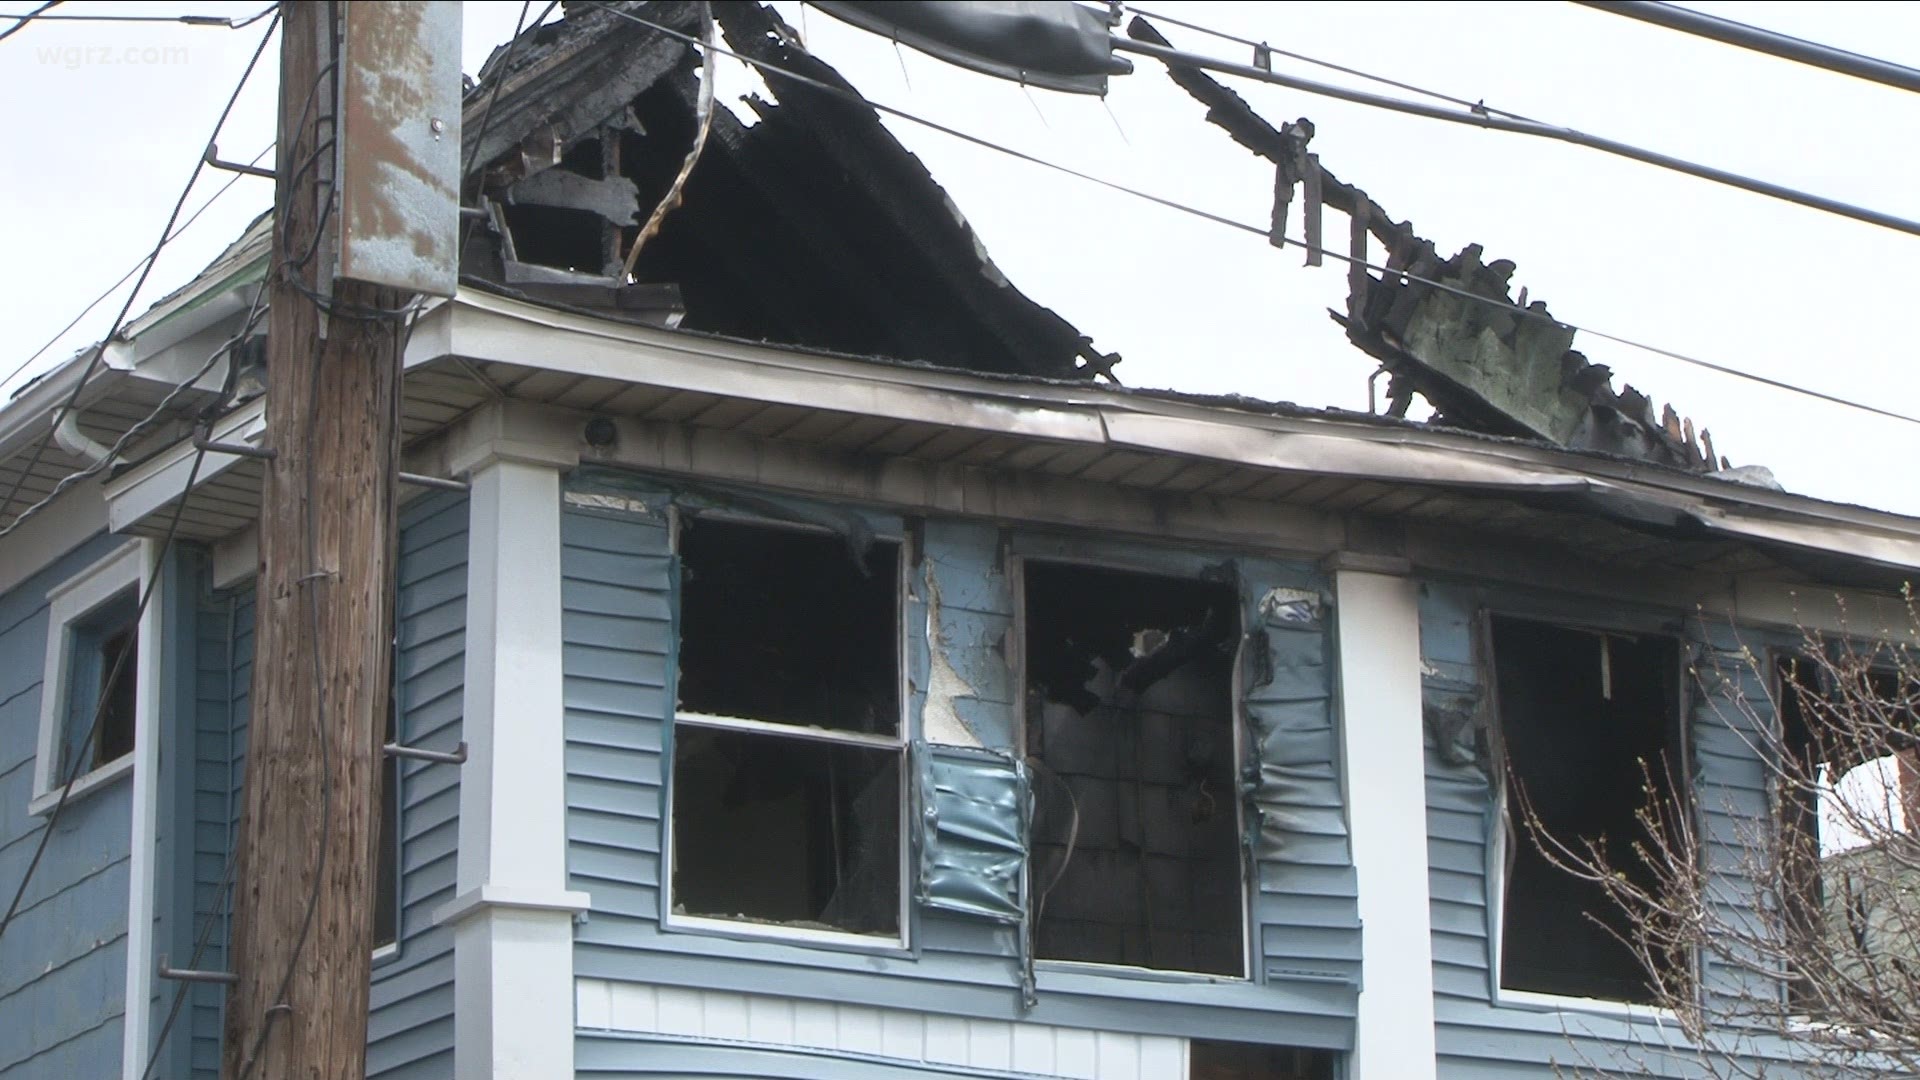 Three adults are getting help from the Red Cross today after their Philadelphia street home was badly damaged by fire Saturday night.